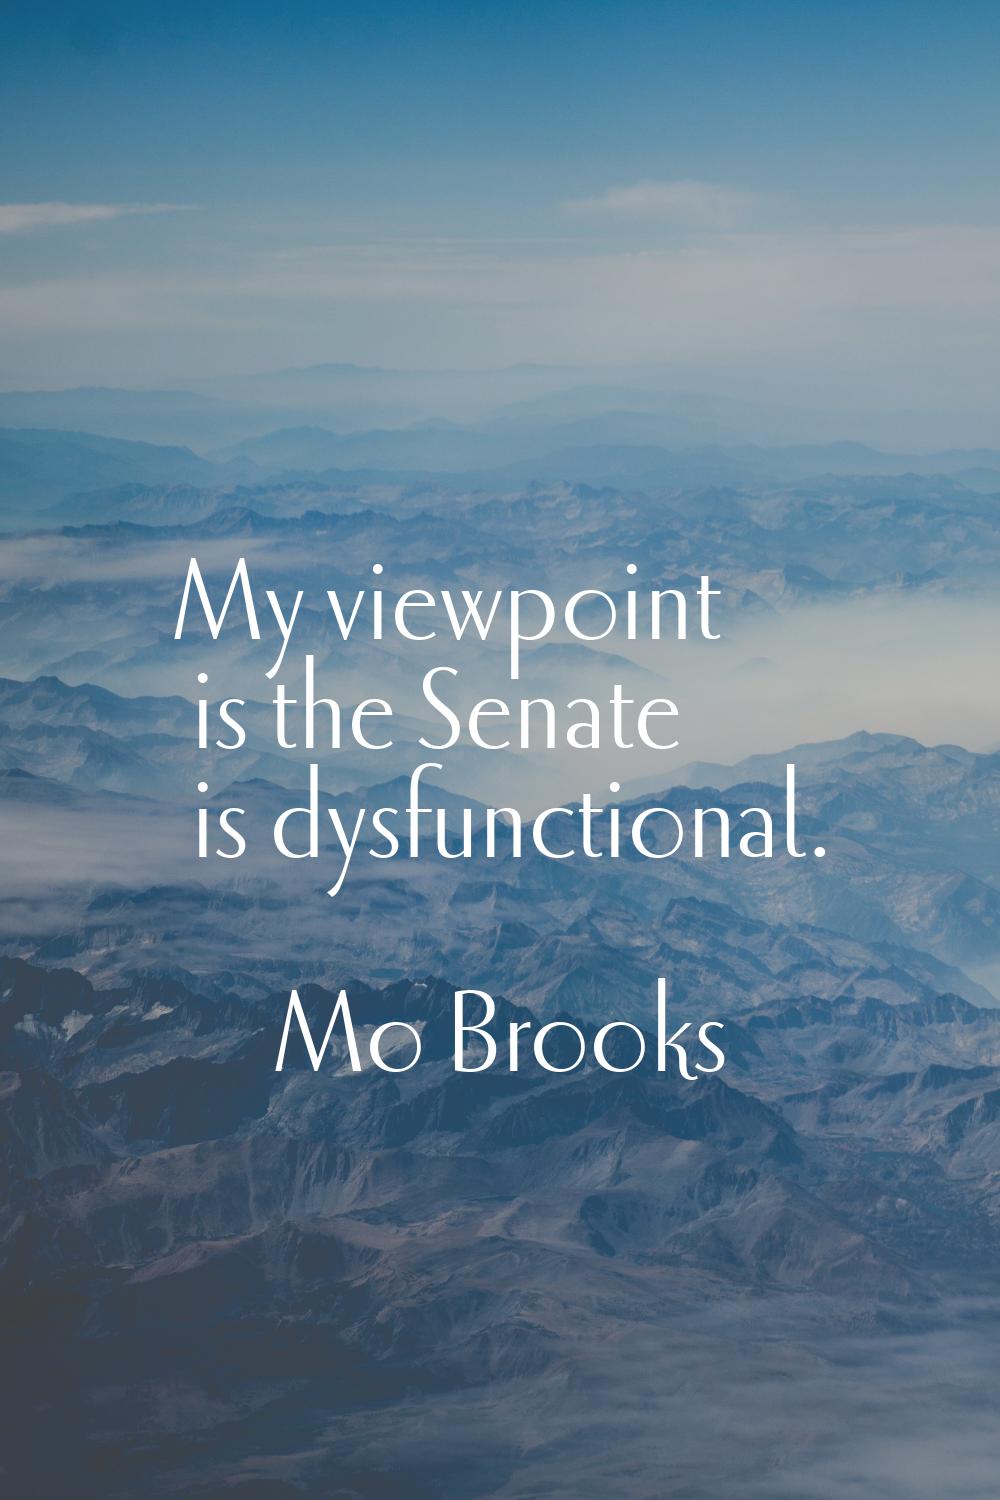 My viewpoint is the Senate is dysfunctional.